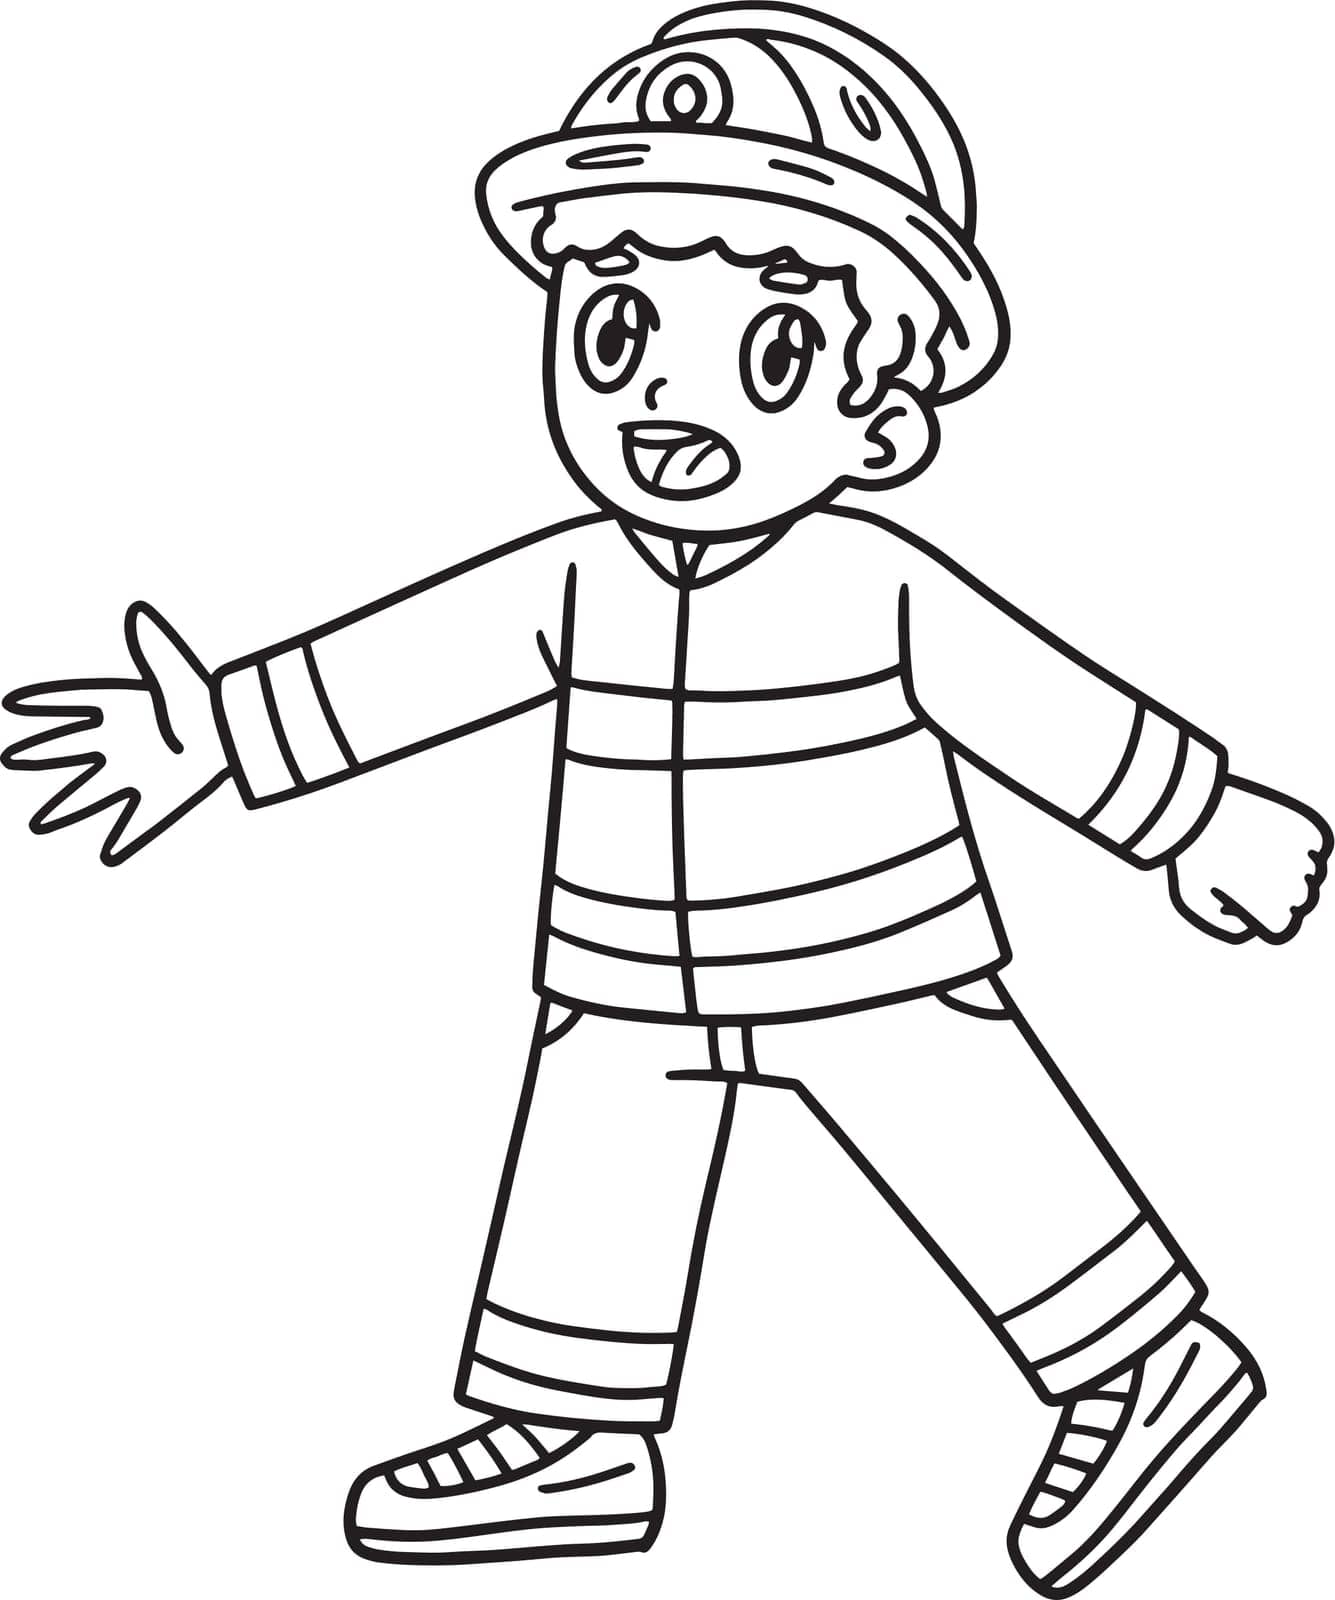 Firefighter Isolated Coloring Page for Kids by abbydesign